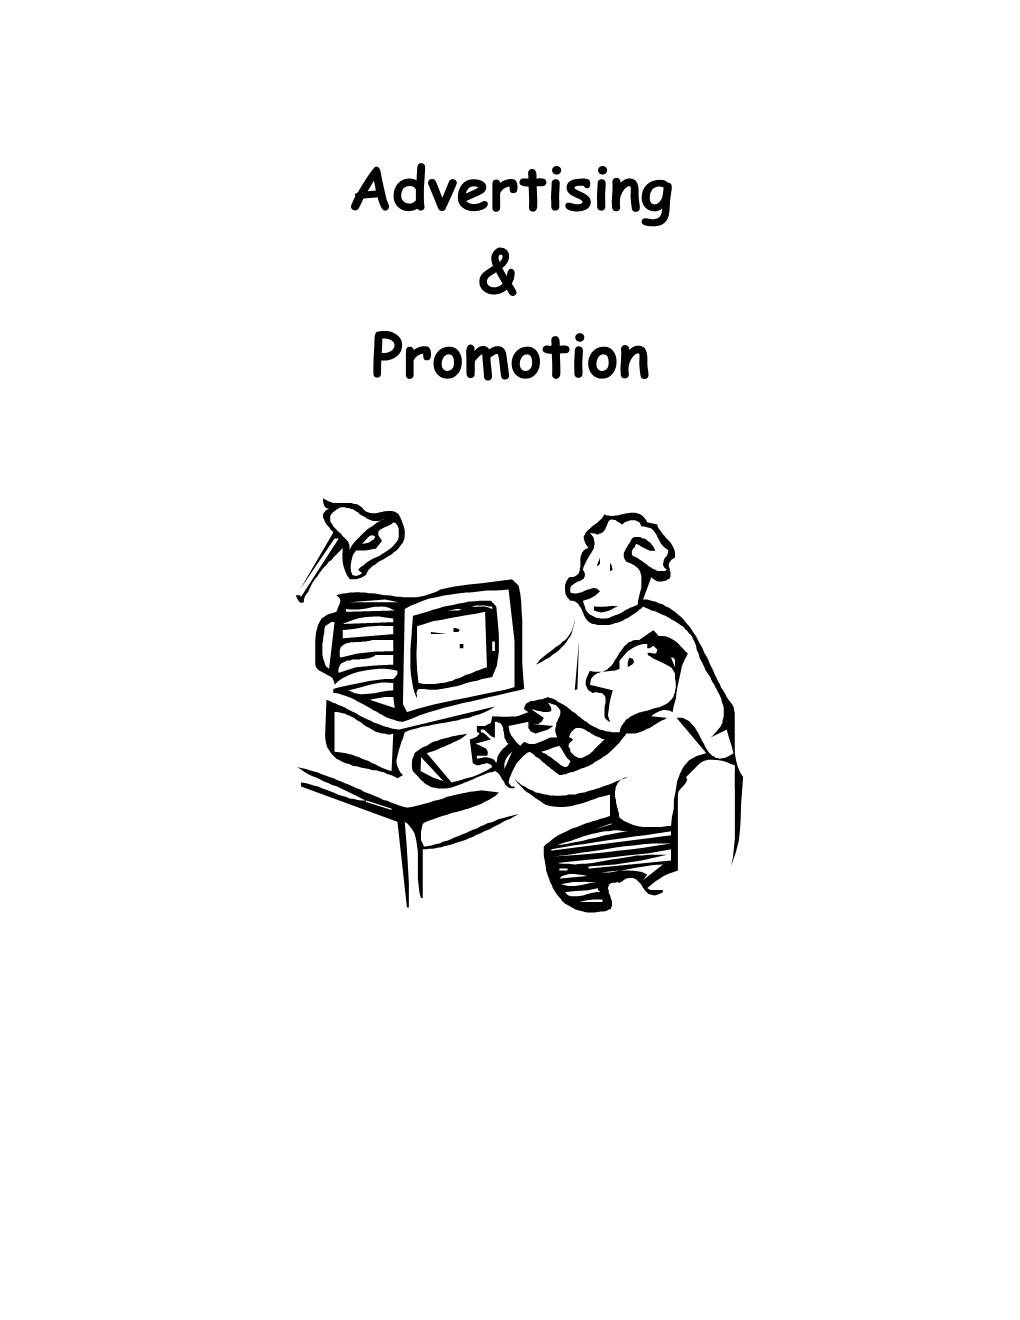 Advertising & Promotion s1